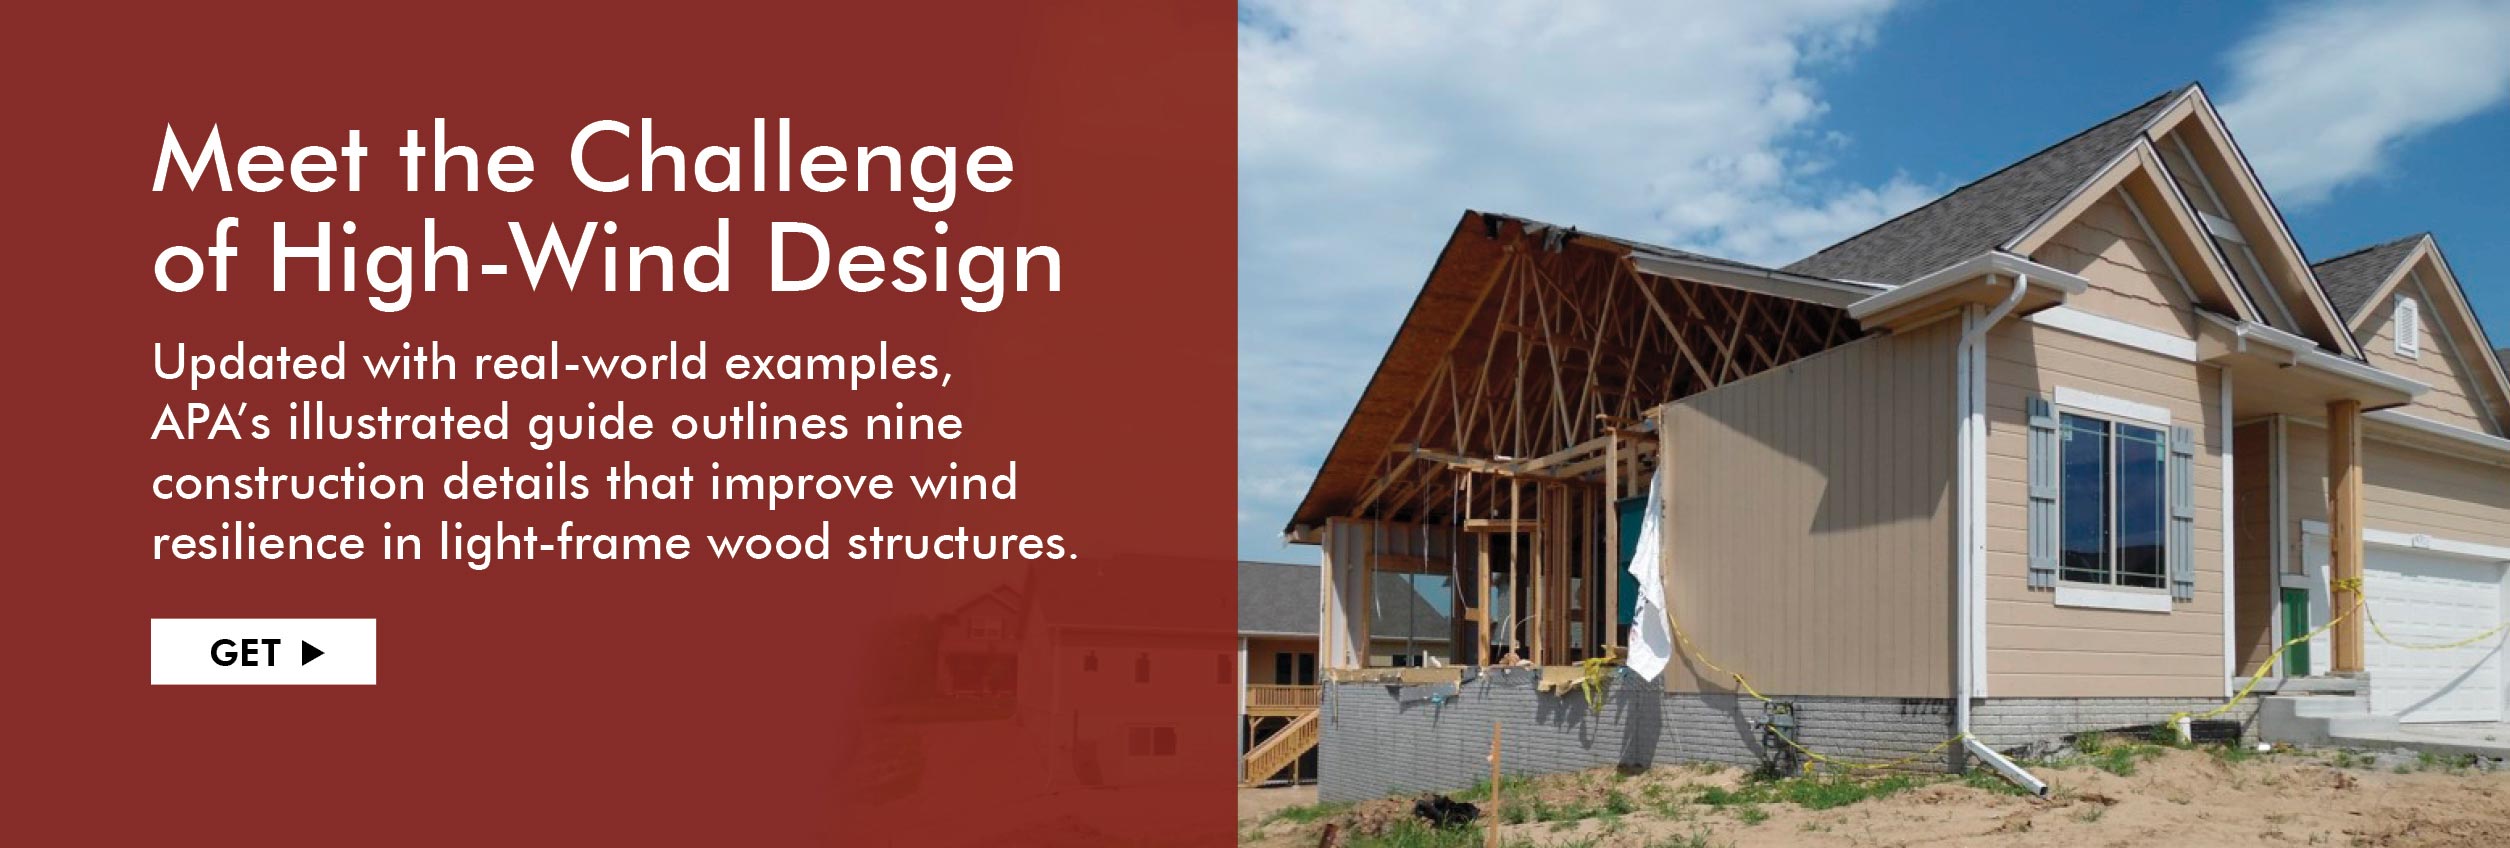 Building for High-Wind Resilience in Light-Frame Wood Construction, Form M310